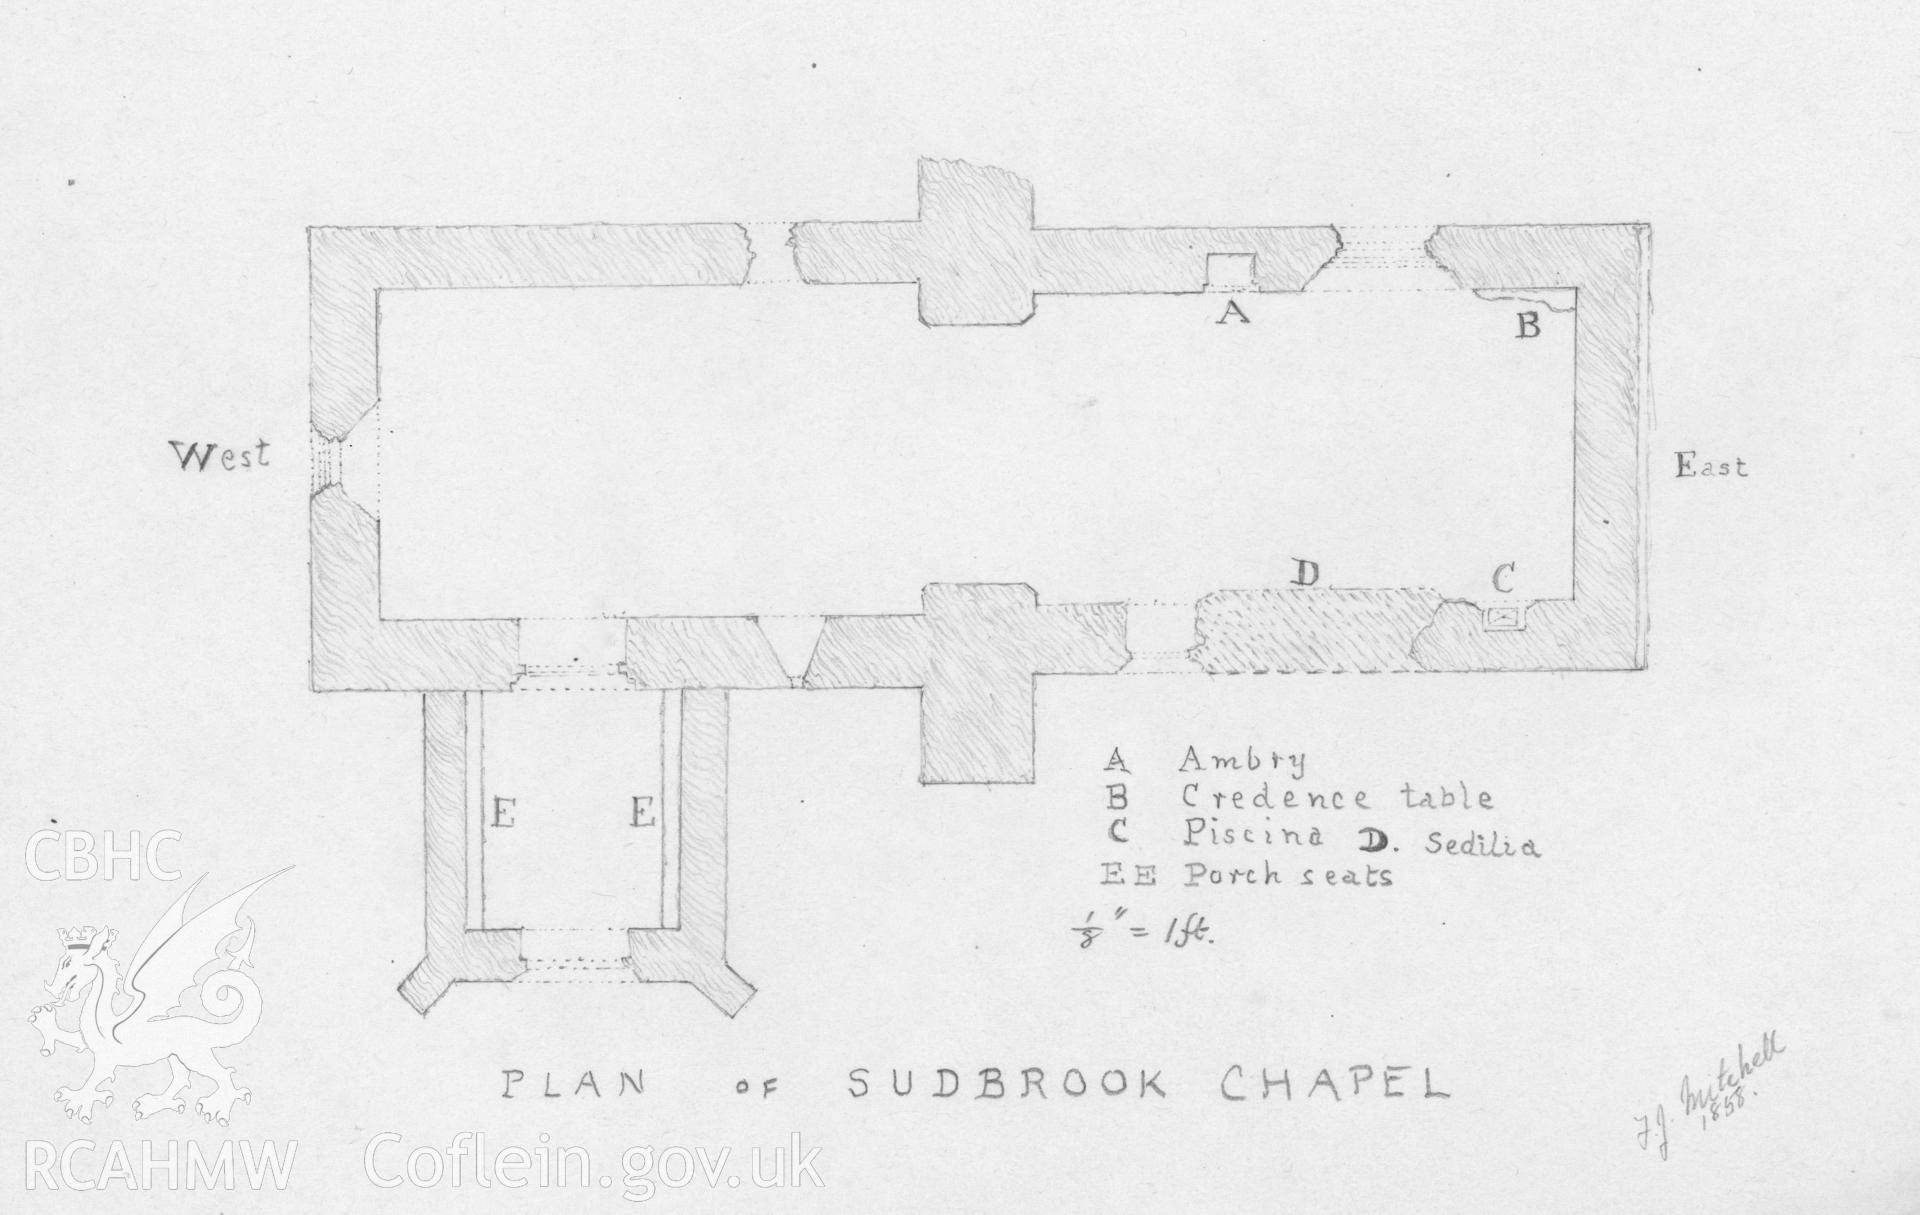 Drawing 5 from the Revd. C.H.A. Porter Collection.  Plan of Sudbrook Chapel, one eight of an inch to 1 foot scale, after an original by F.J. Mitchell.